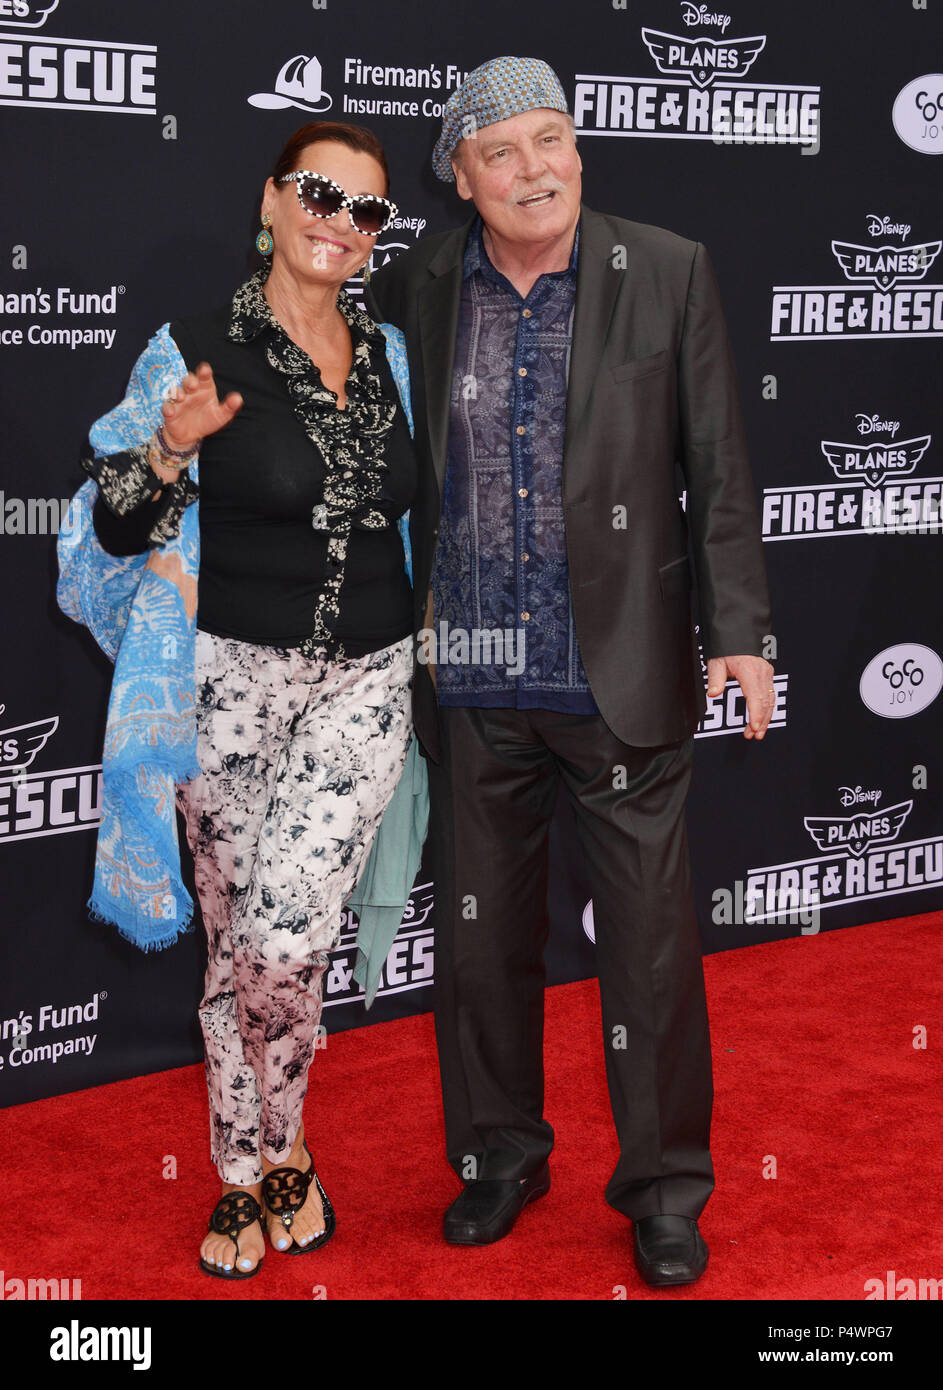 Stacy Keach and wife at the Planes, Fire and Rescue Premiere at the El Capitan Theatre in Los Angeles.   Stacy Keach and wife 065 ------------- Red Carpet Event, Vertical, USA, Film Industry, Celebrities,  Photography, Bestof, Arts Culture and Entertainment, Topix Celebrities fashion /  Vertical, Best of, Event in Hollywood Life - California,  Red Carpet and backstage, USA, Film Industry, Celebrities,  movie celebrities, TV celebrities, Music celebrities, Photography, Bestof, Arts Culture and Entertainment,  Topix, vertical,  family from from the year , 2014, inquiry tsuni@Gamma-USA.com Husban Stock Photo